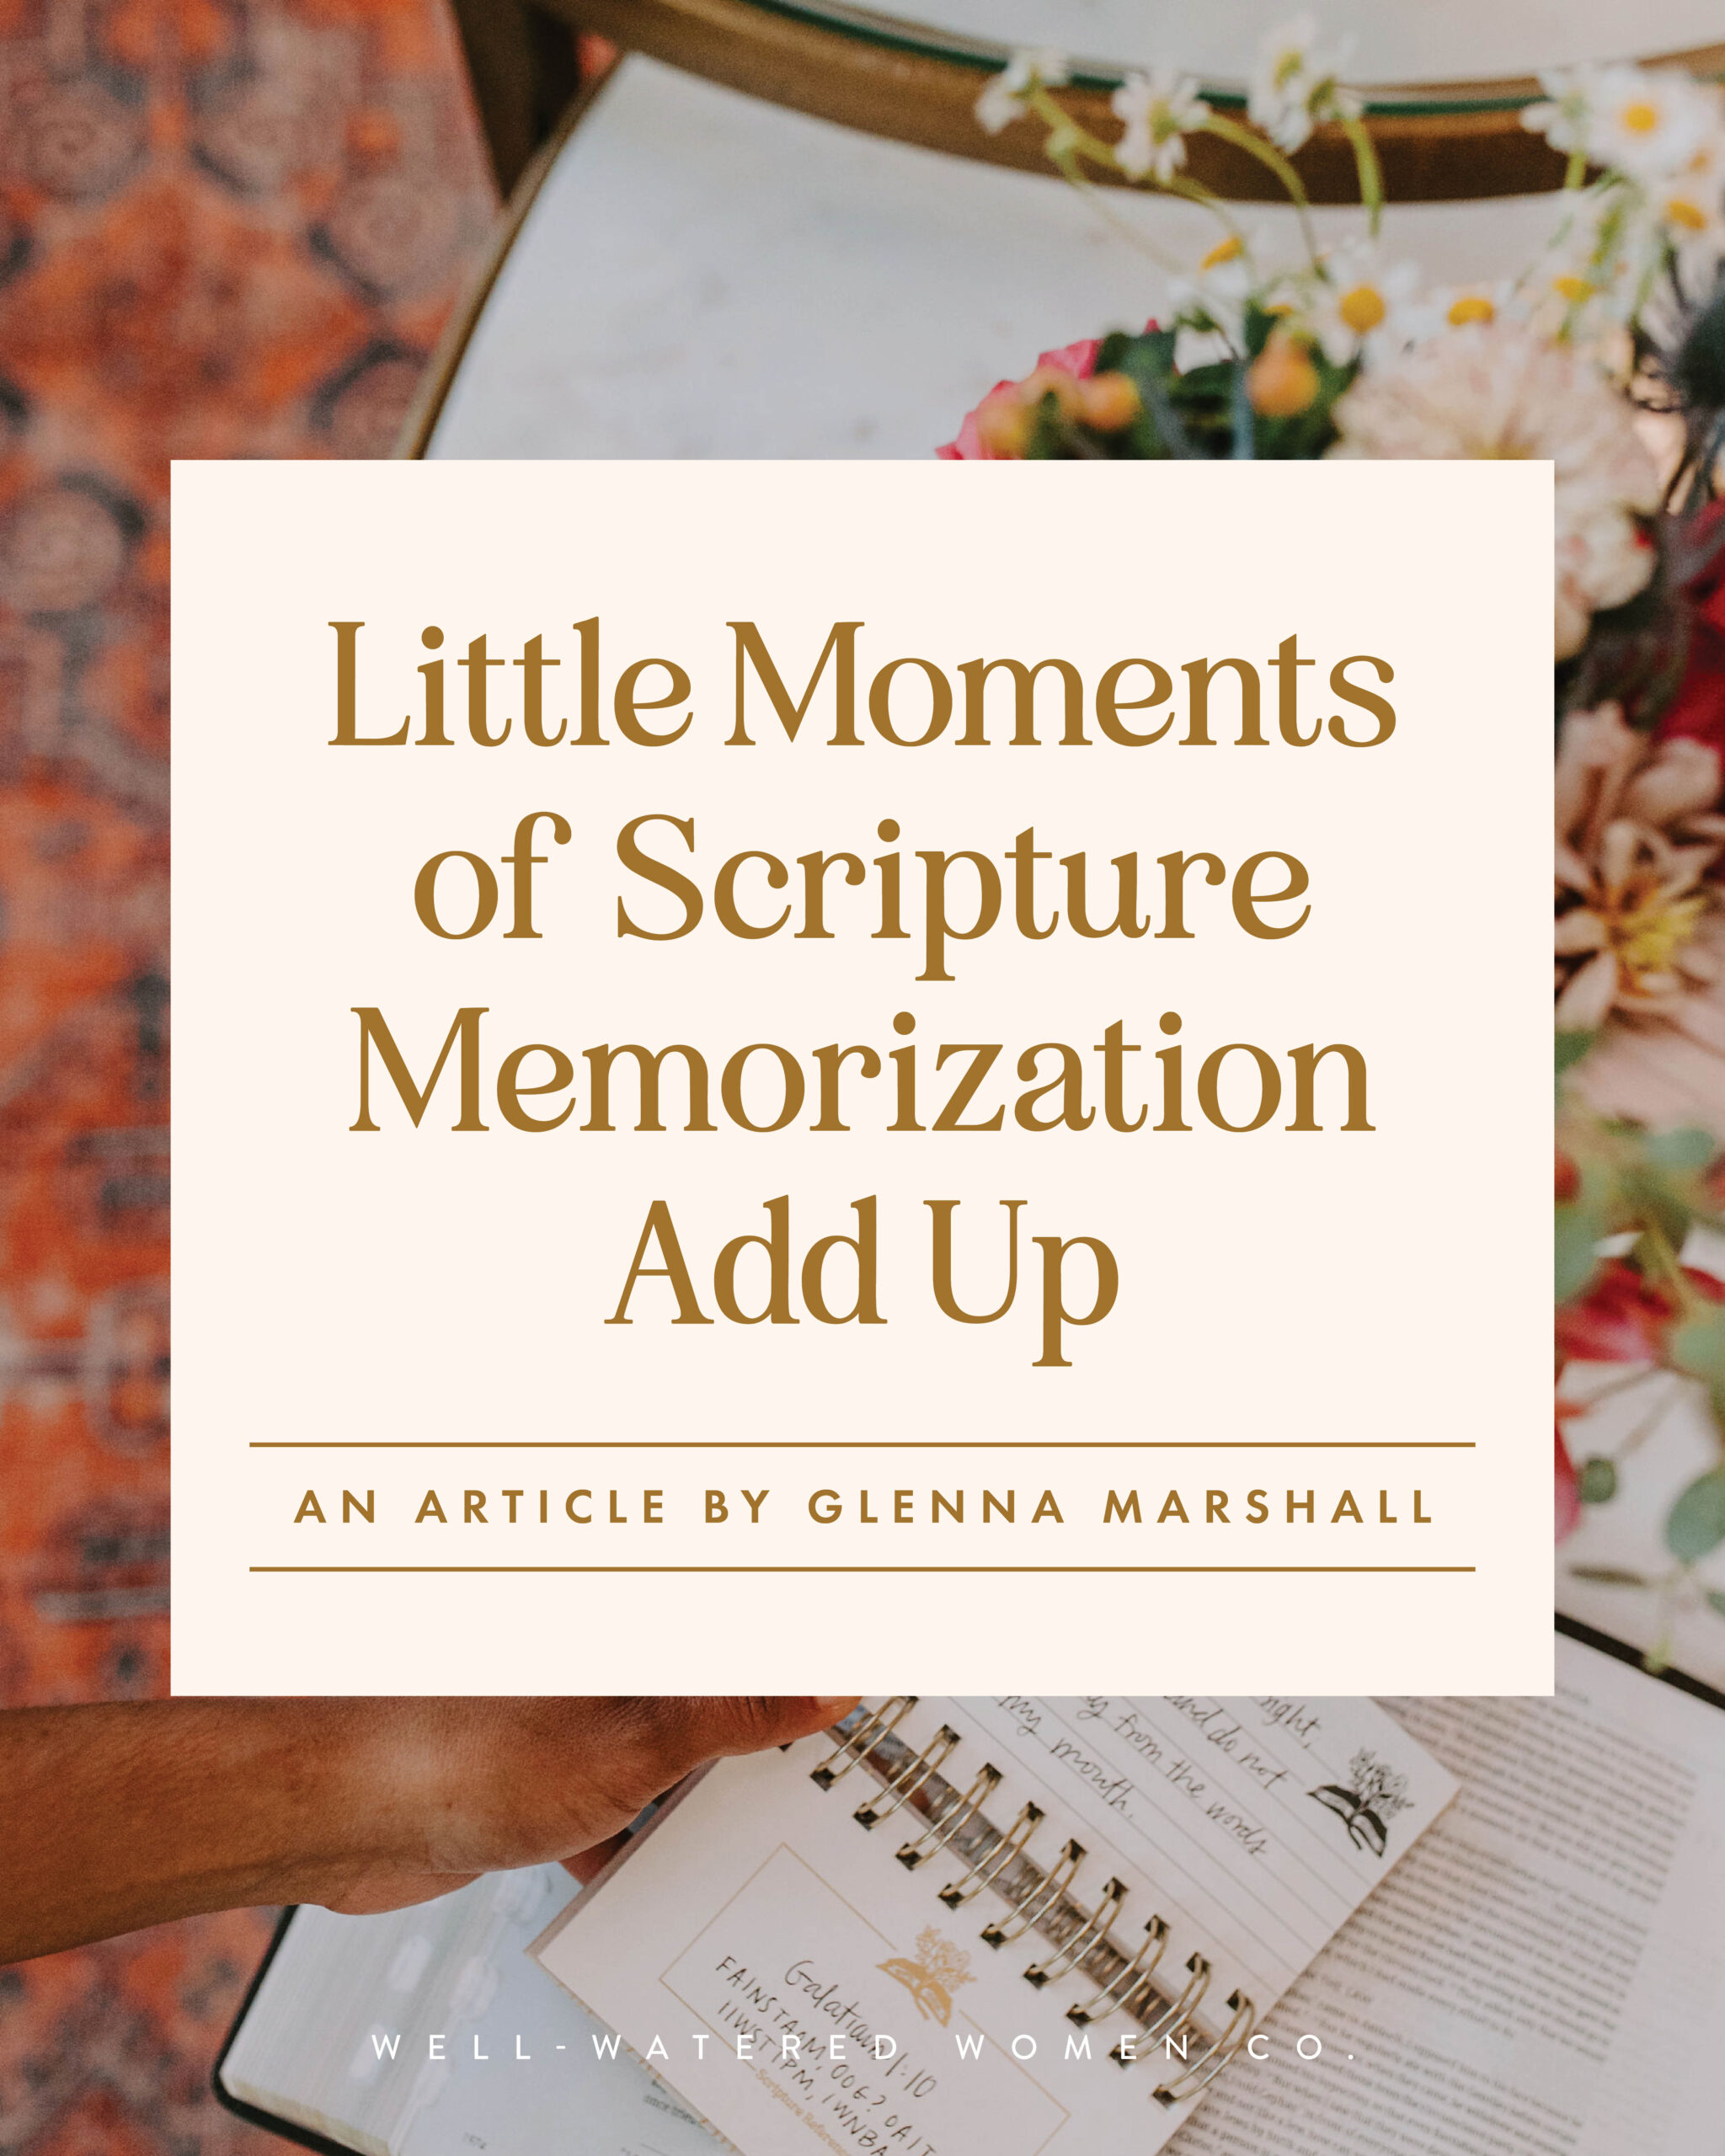 Little Moments of Scripture Memorization Add Up - an article from Well-Watered Women